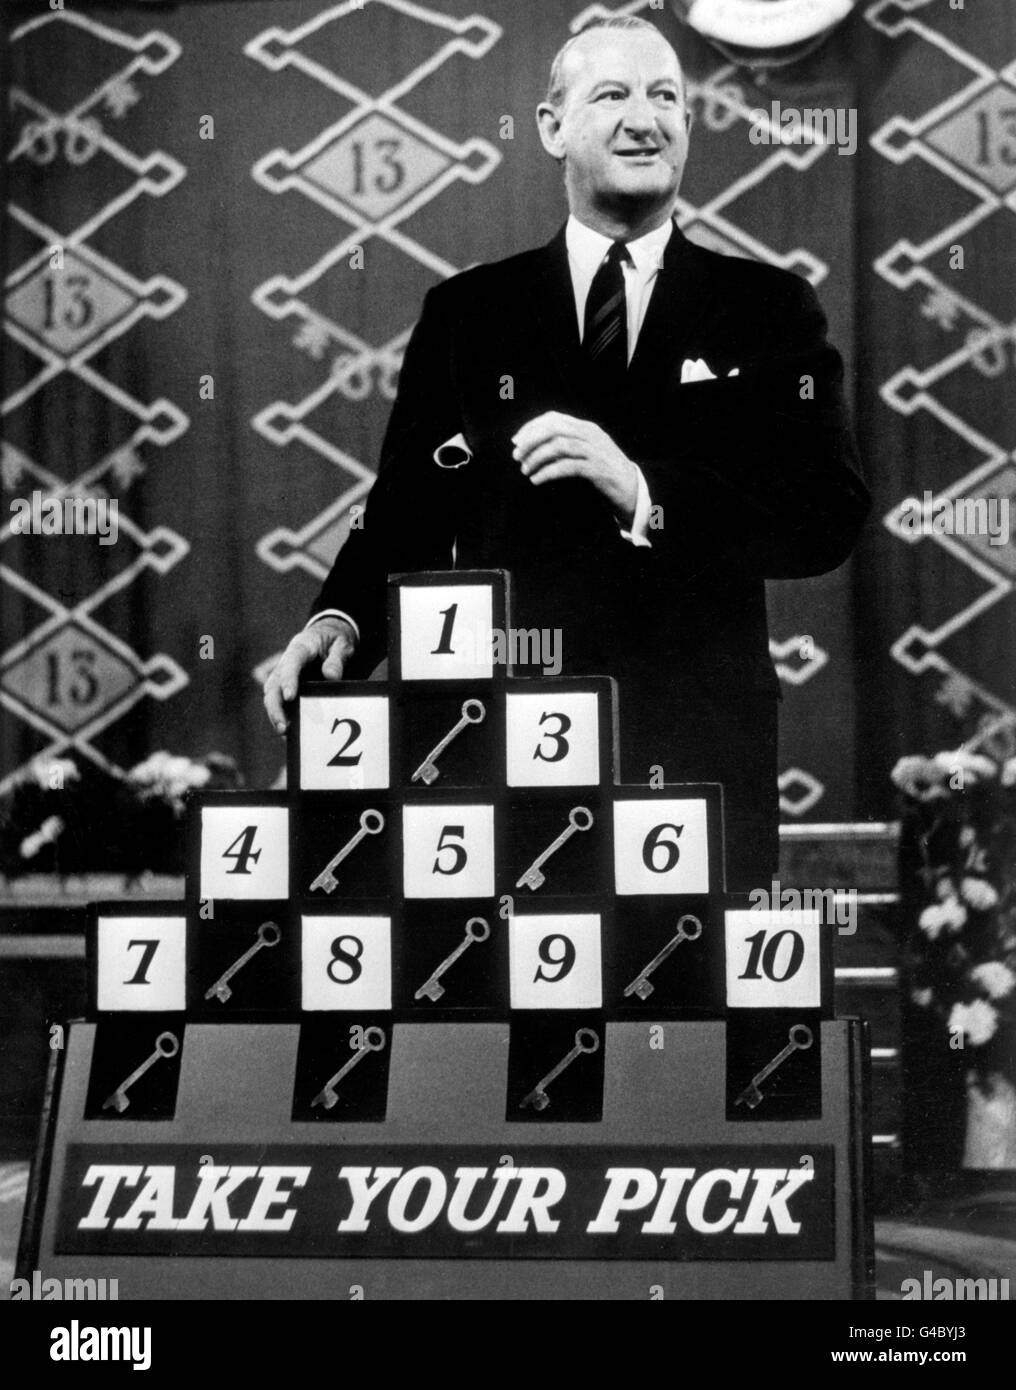 Television - 'Take Your Pick' - Michael Miles - London. Michael Miles on his famous television show 'Take Your Pick'. Stock Photo